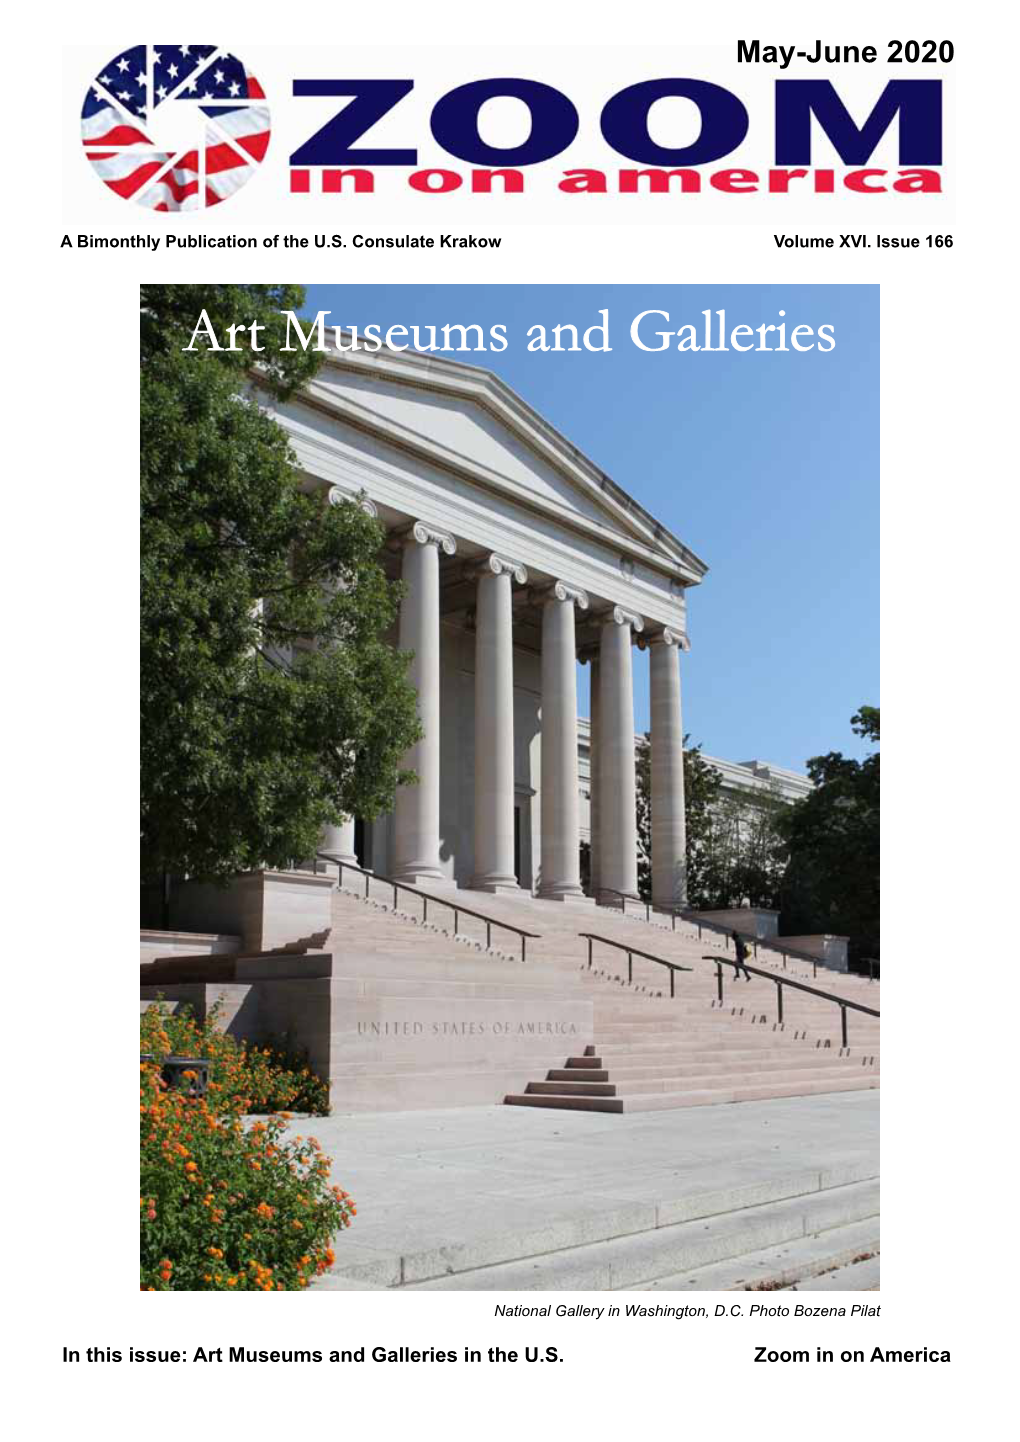 May-June2020 Issue 166 Art Museums and Galleries in the U.S